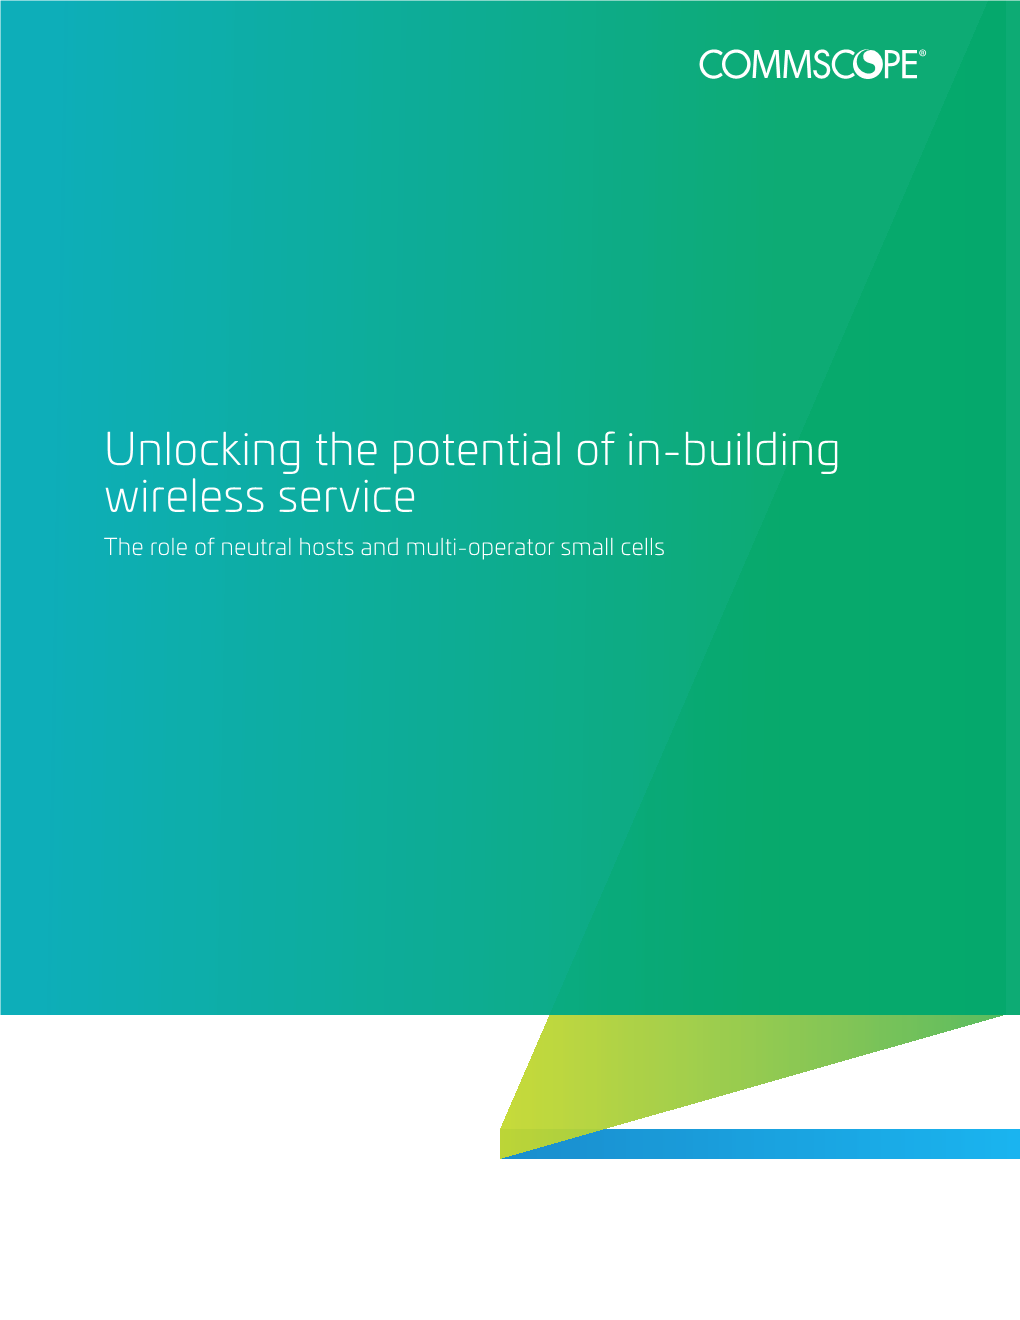 White Paper: Multi-Operator Small Cells for Neutral Hosts